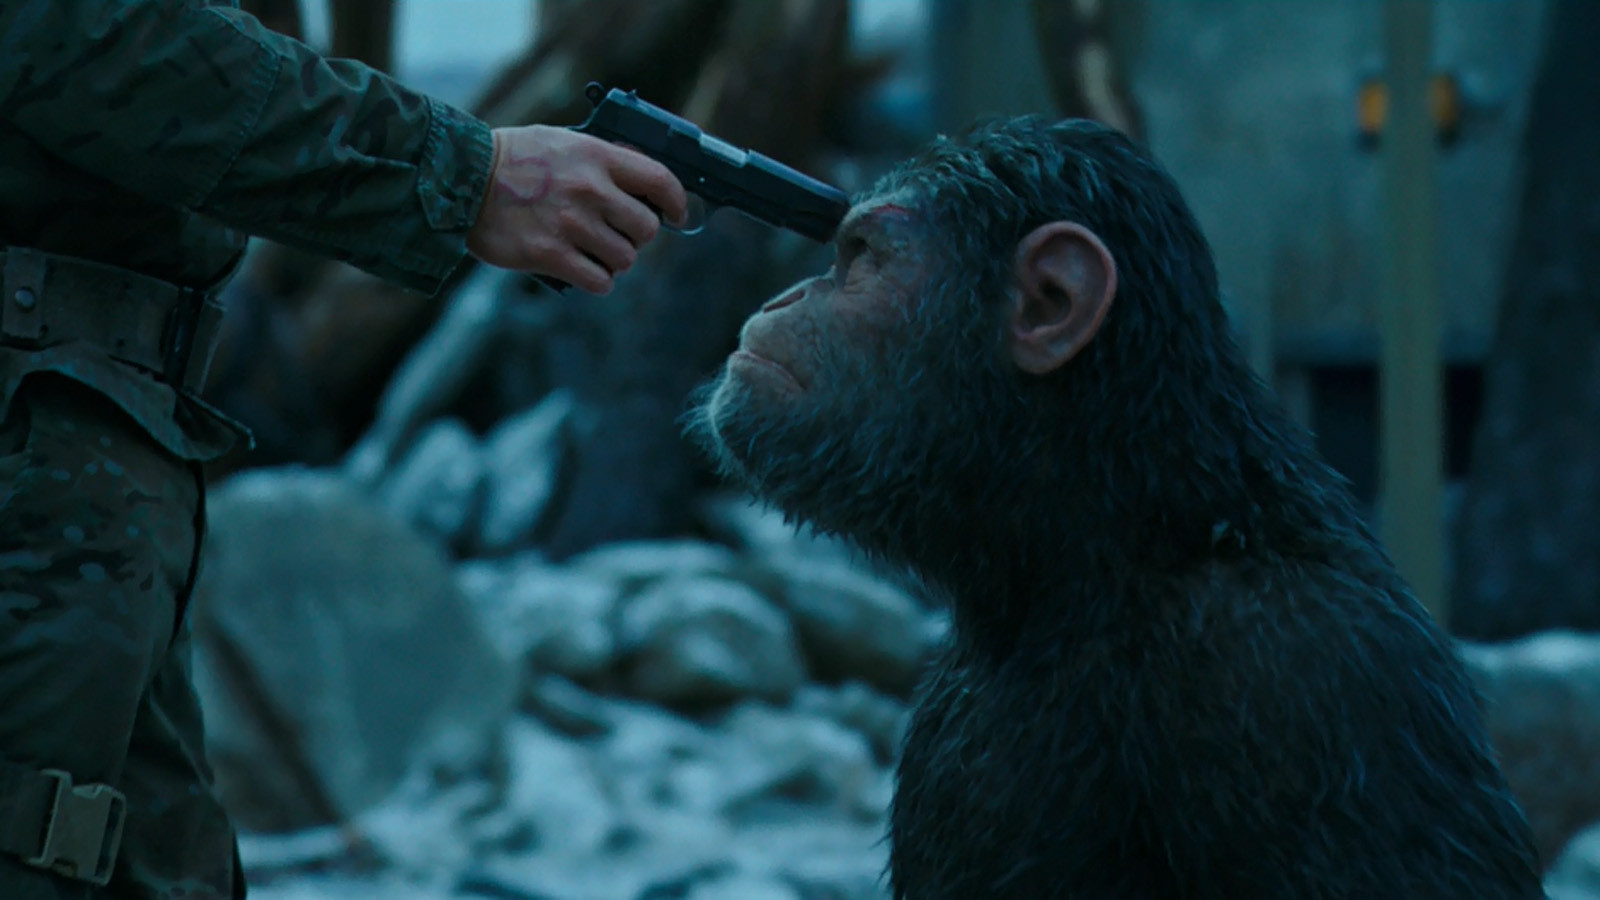 movie review planet of the apes